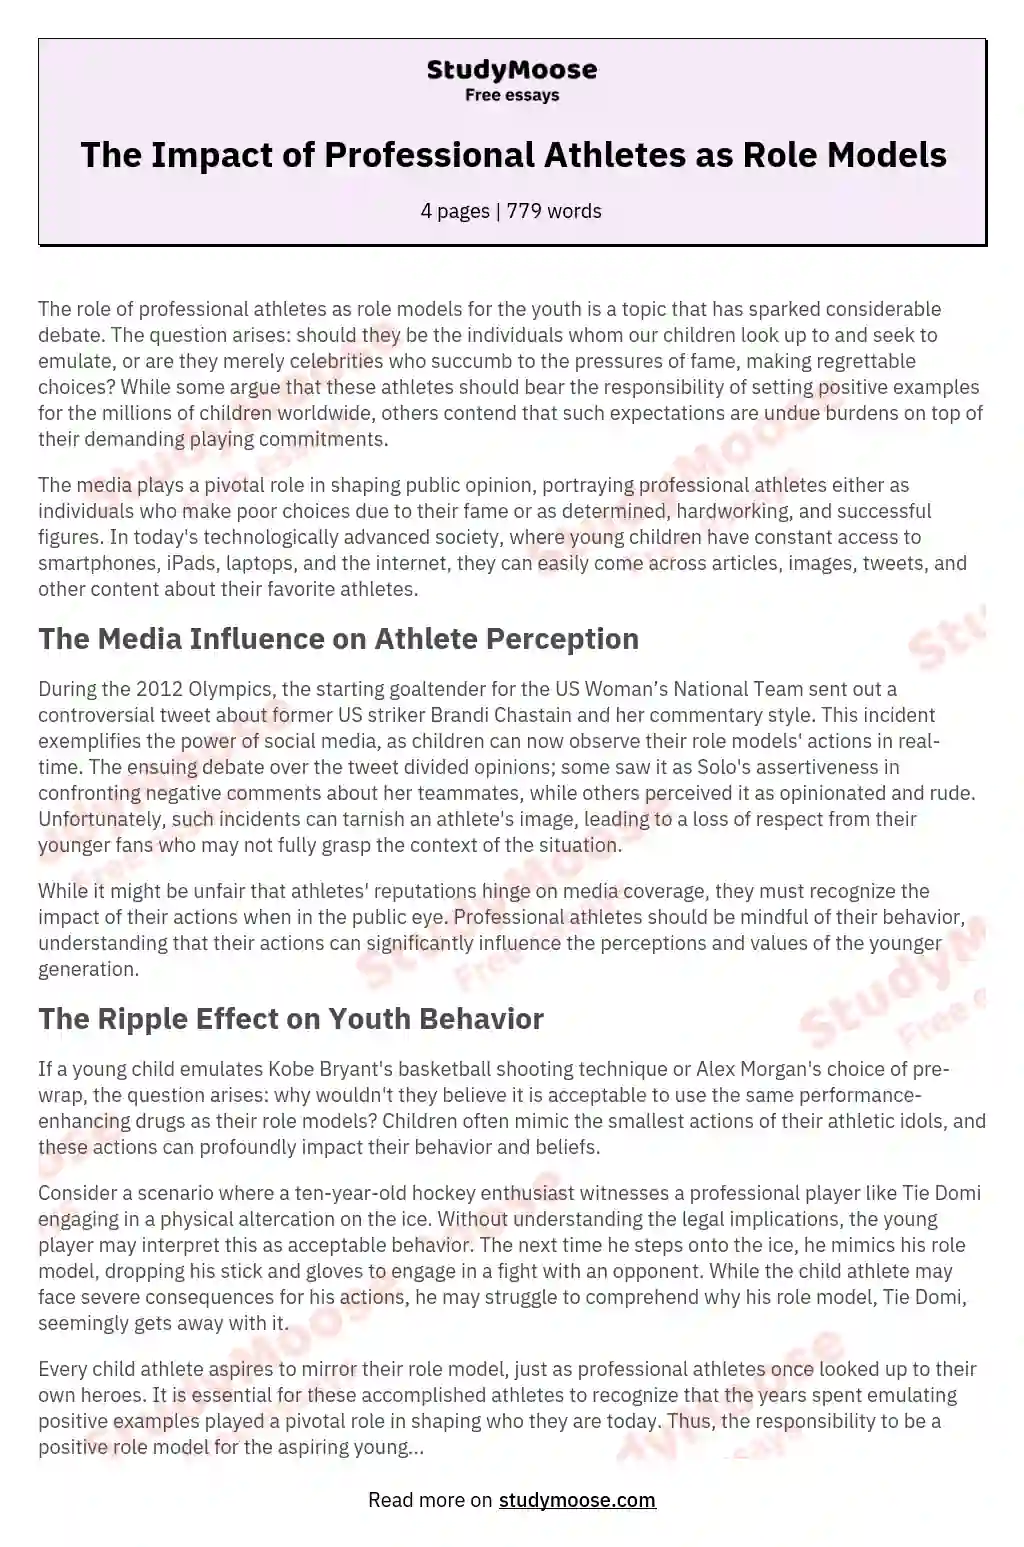 The Impact of Professional Athletes as Role Models essay